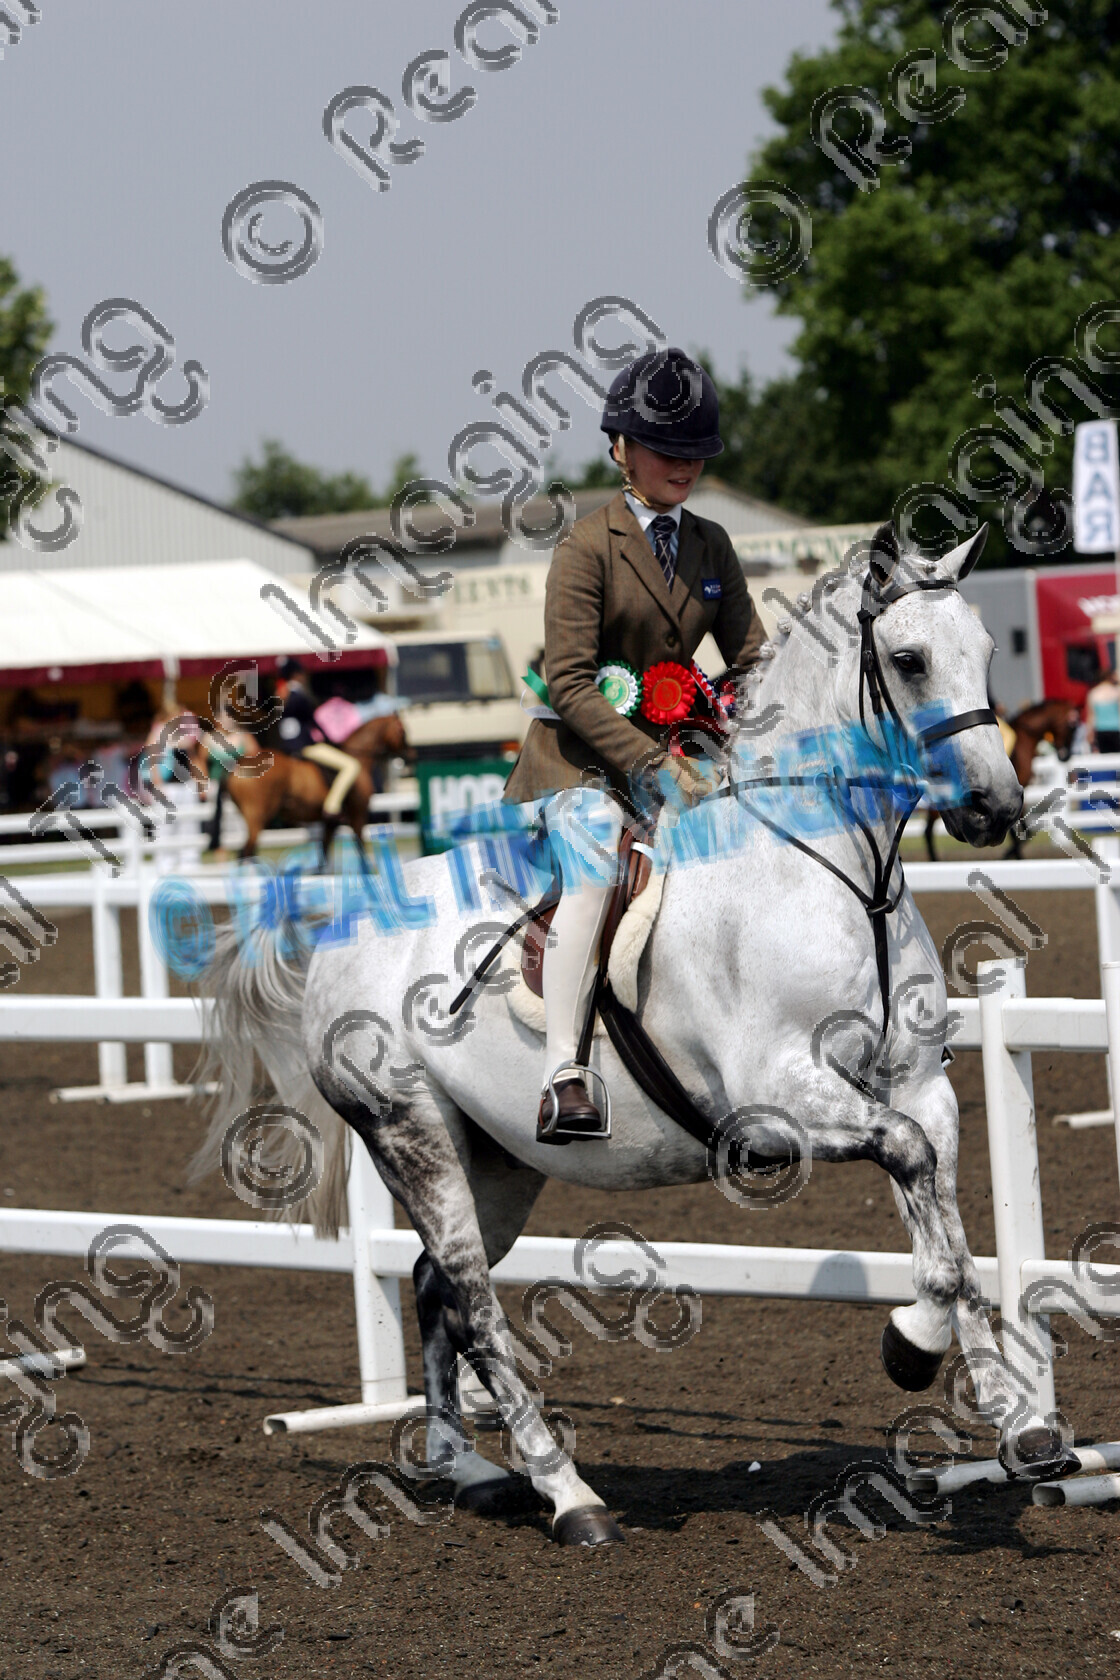 S06-30-3-154 copy 
 Keywords: The Royal Show rosette rosettes prize winner horse pony show showing Sunday 2 July 2006 canter cantering action championship champion ridden mounted 821 John's Choice ridden by Izzy Dixon,
Mrs Yvette Dixon grey gray gelding Best Working Hunter Pony